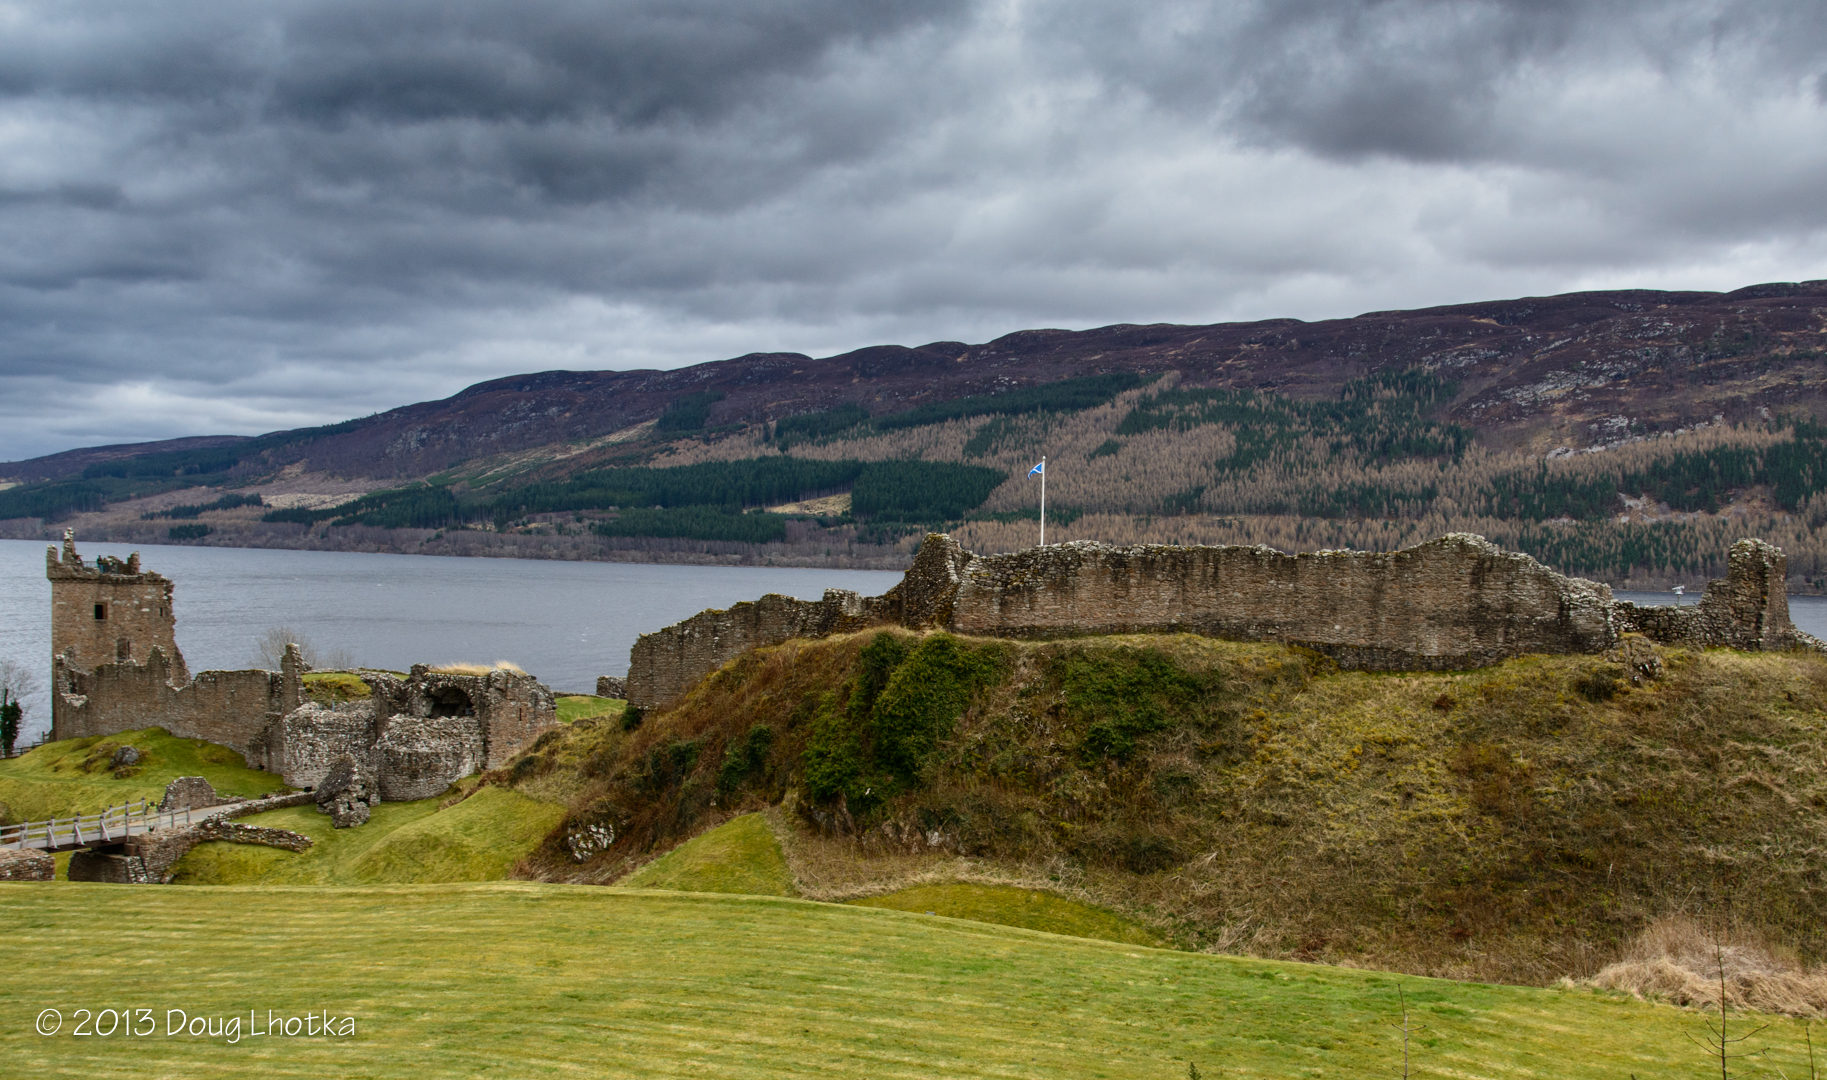 Friday Photo - In honor of the breach, monsters at the gate - Urquhart Castle & Loch Ness